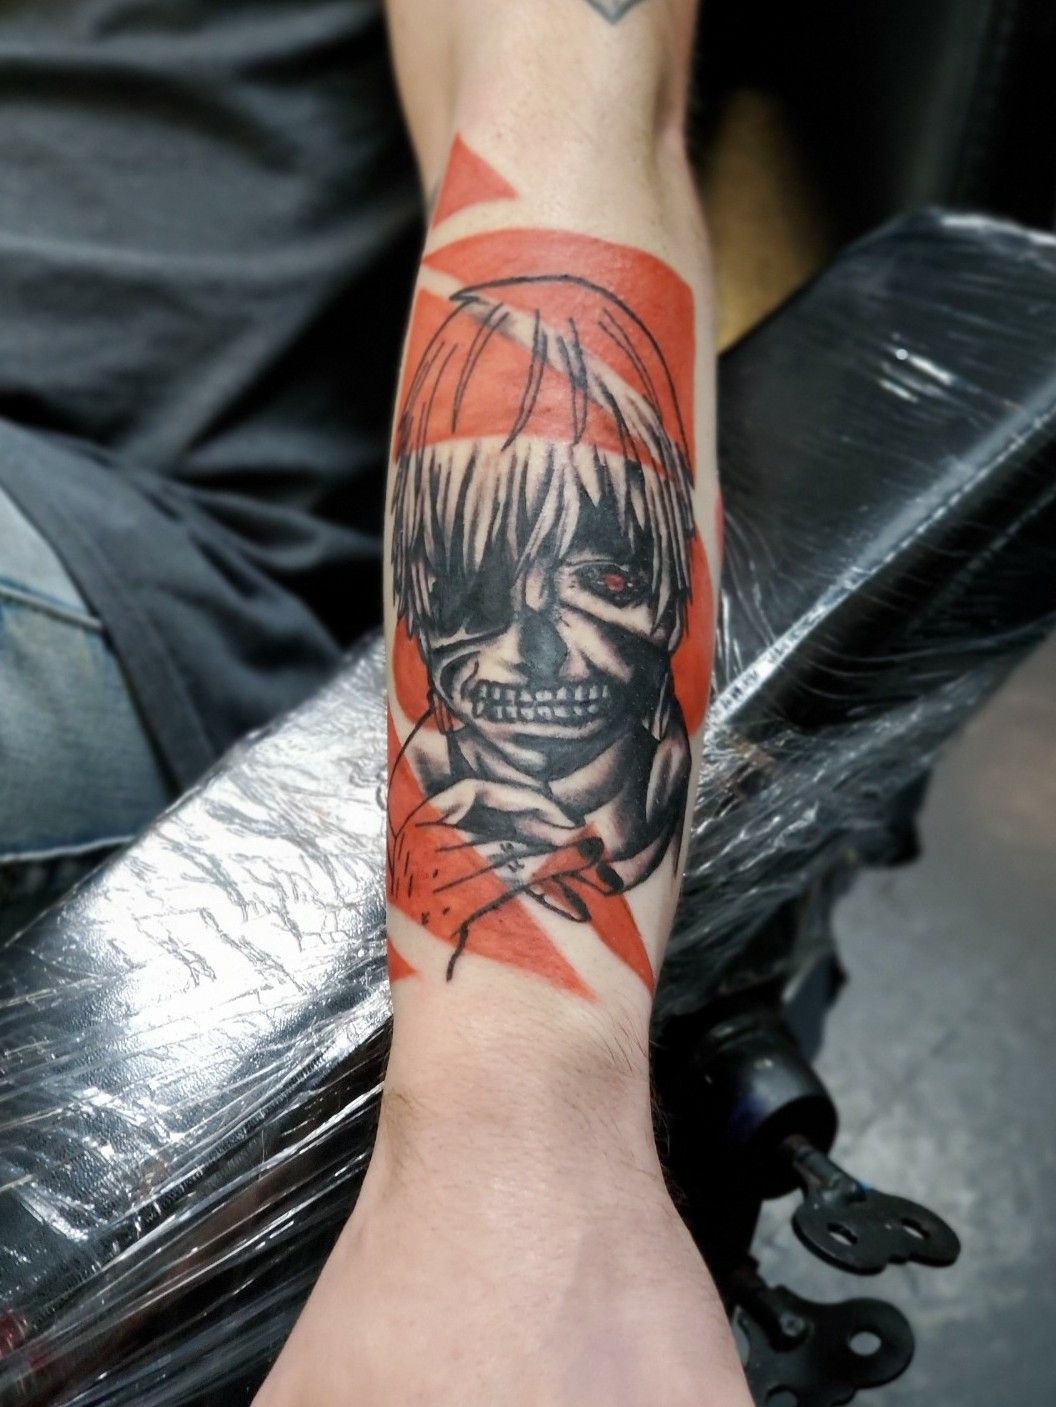 The Top 47 Tokyo Ghoul Tattoo Ideas  2021 Inspiration Guide